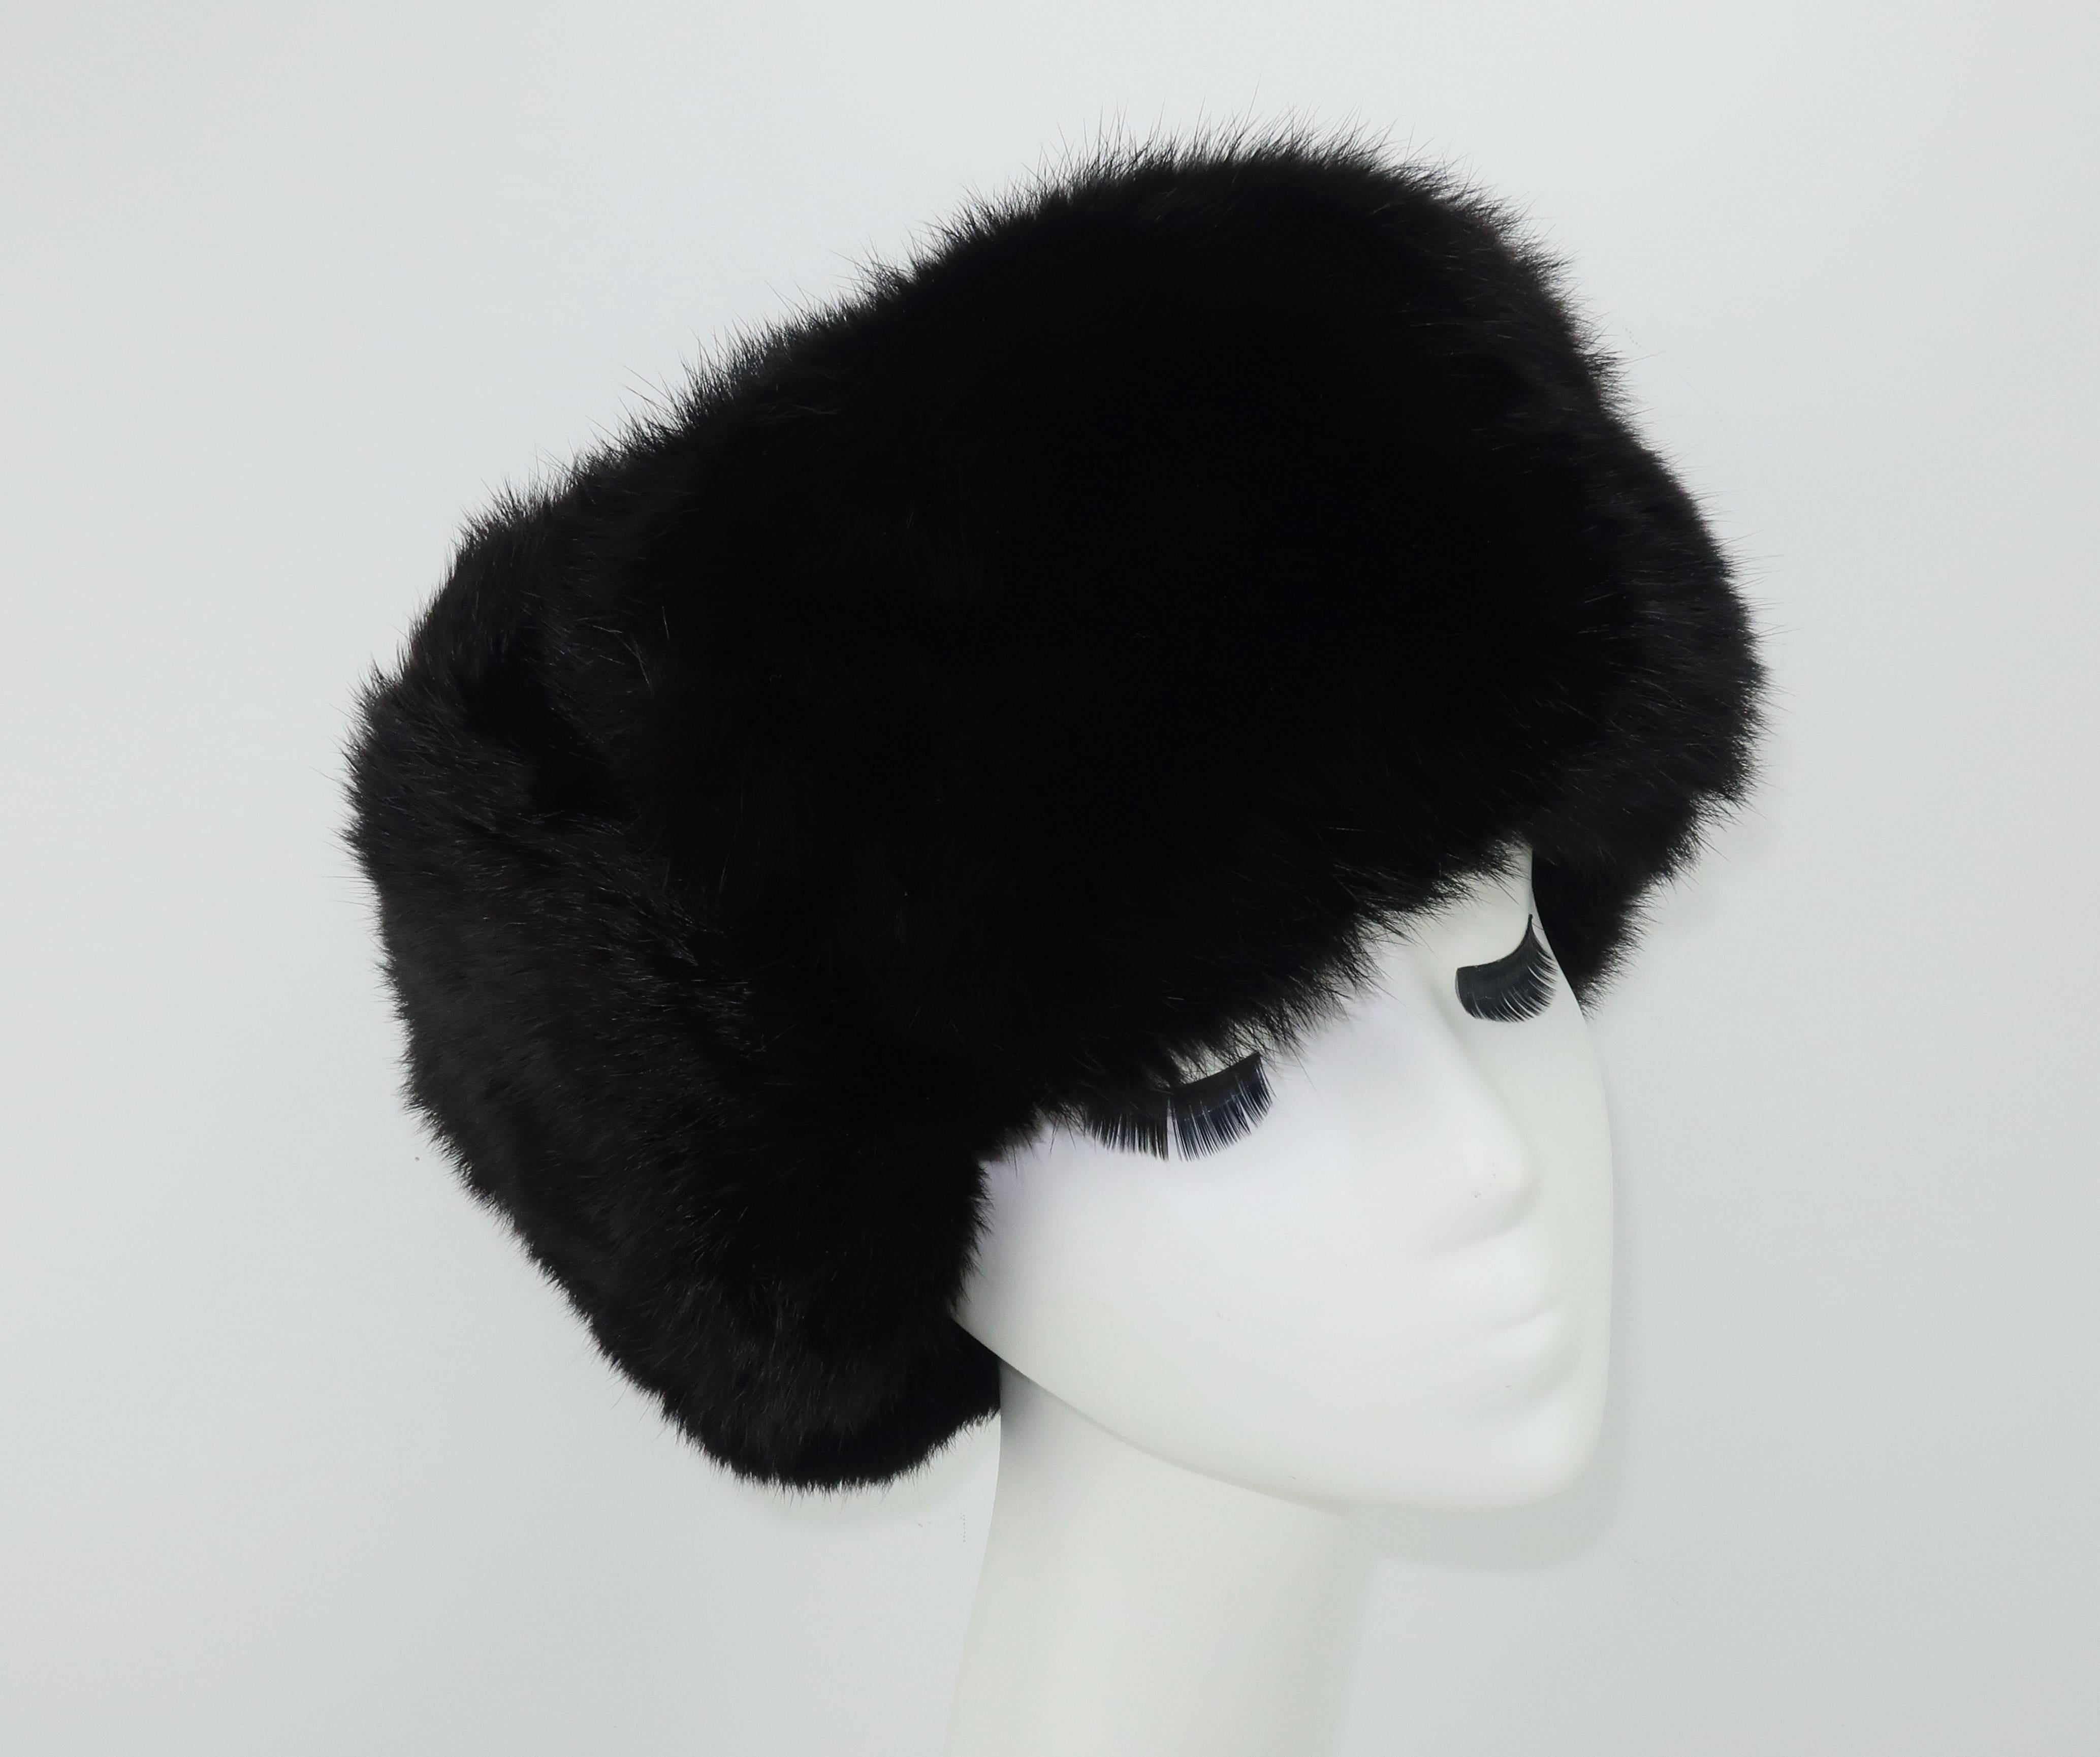 From Russia with love!  A Bond girl would be happy to wear this practical and yet oh so stylish Russian sable fur trapper's hat.  The lush sable is a deep dark brown that almost appears black and it is shaped into a traditional form that can be worn